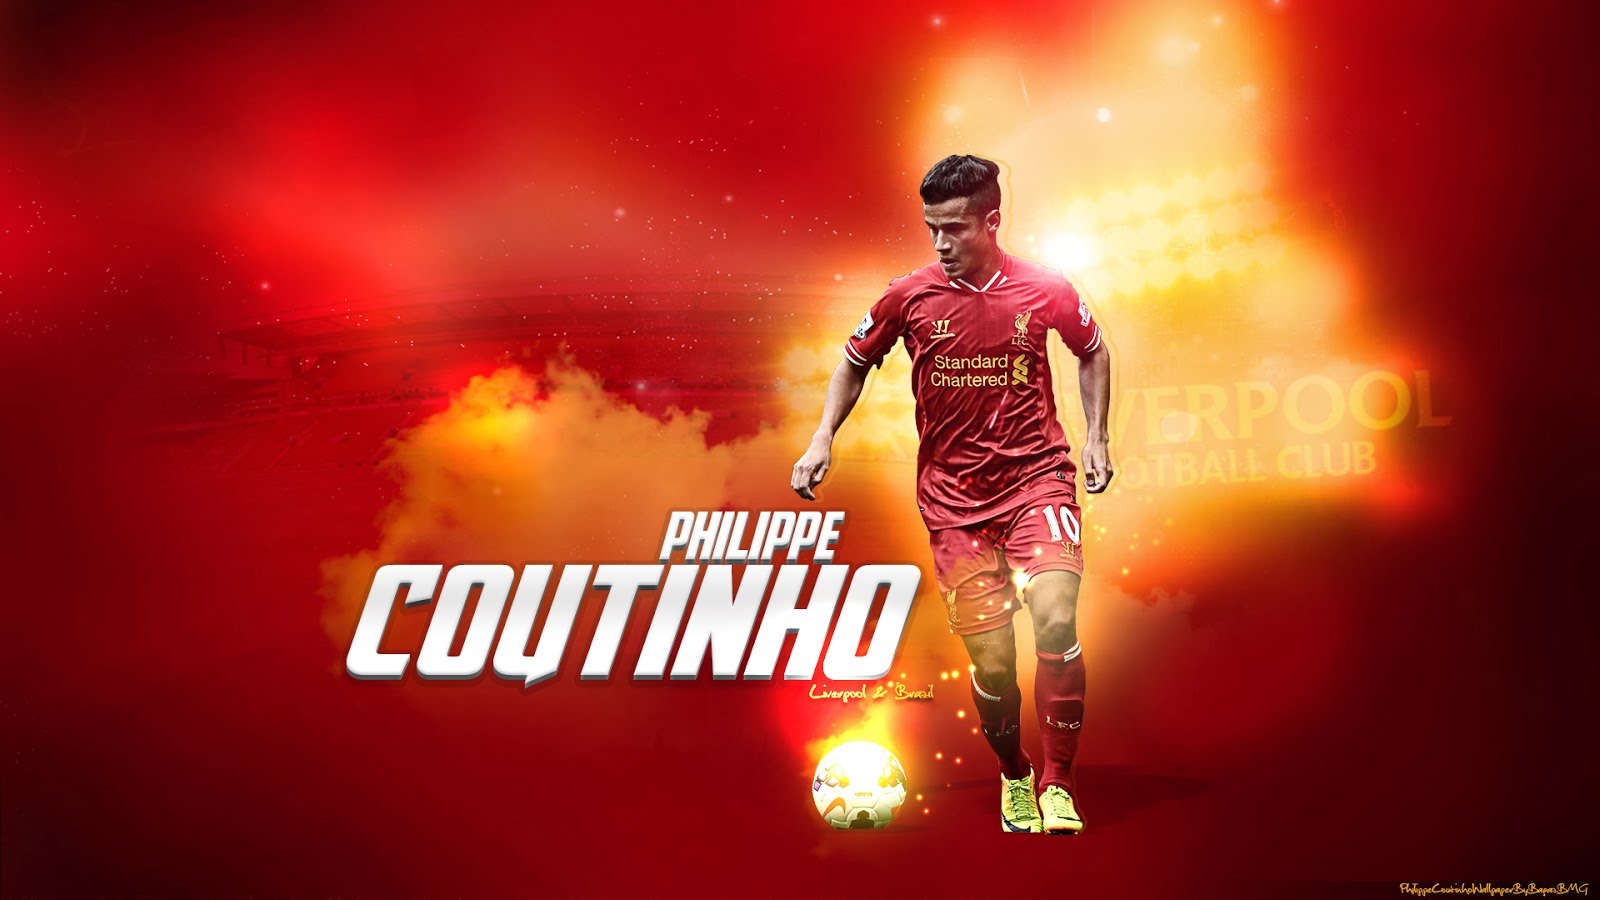 Philippe Coutinho Wallpaper HD